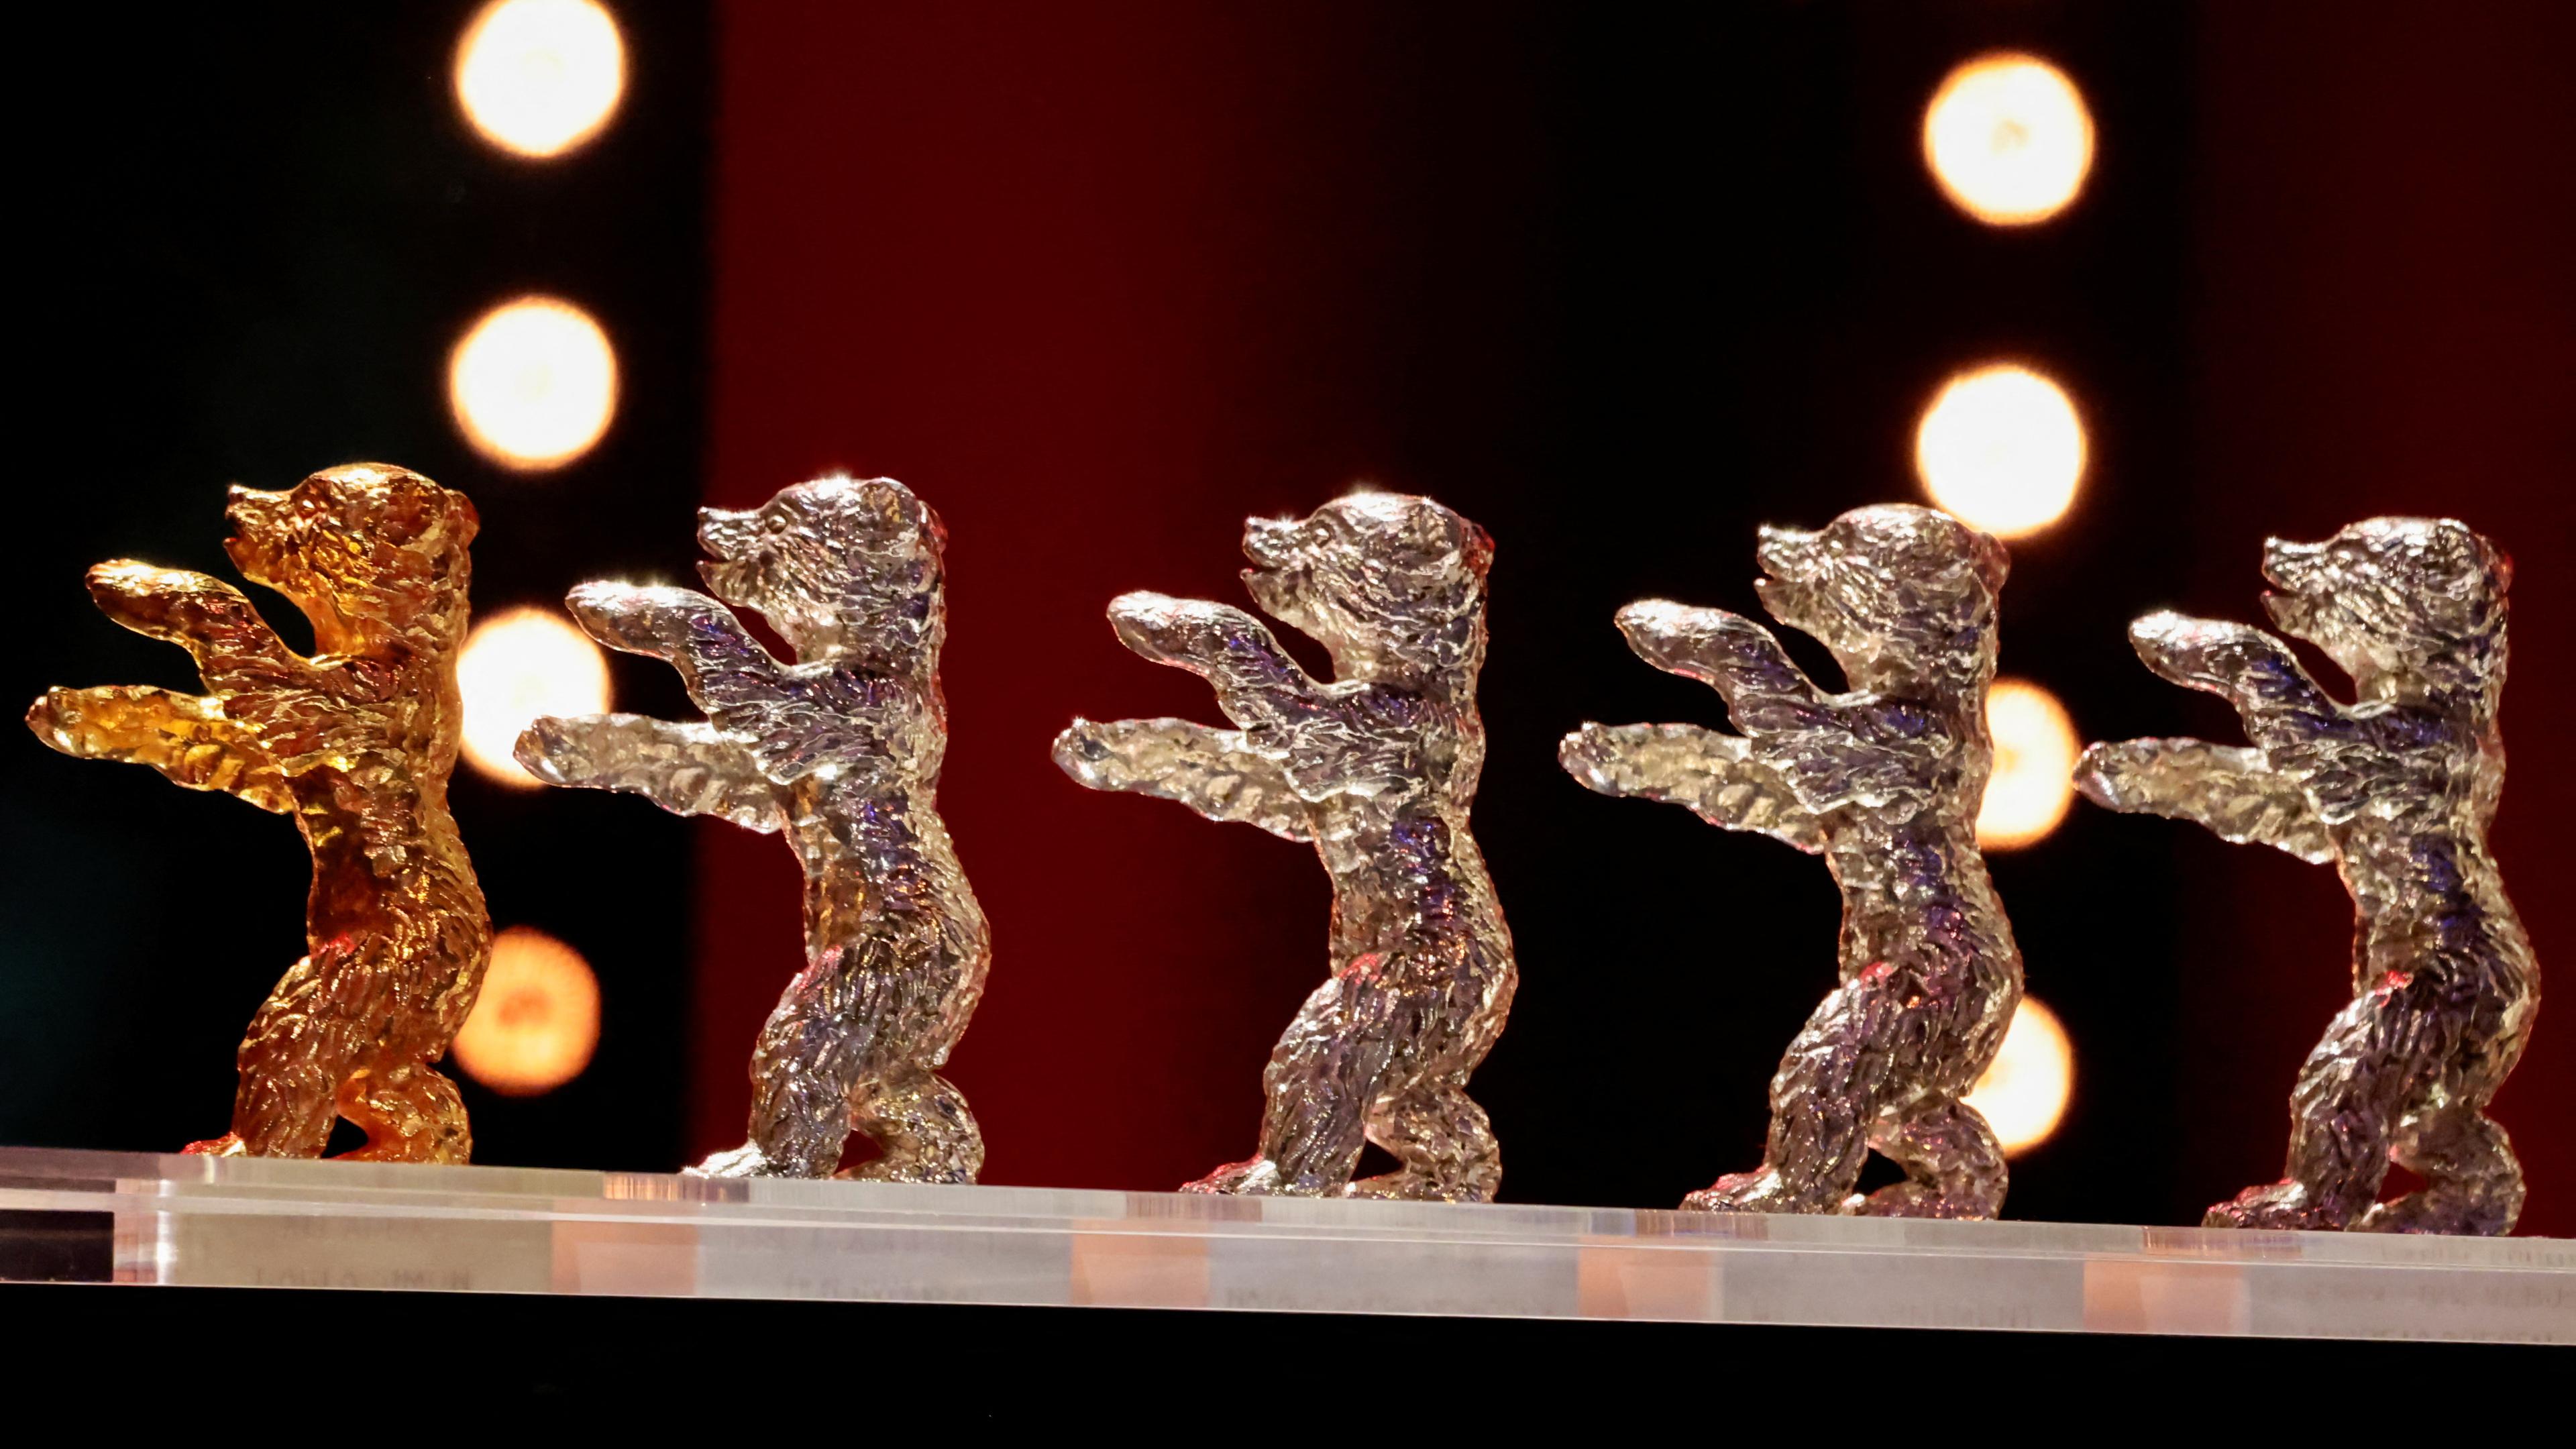 Berlinale Bear award statues are lined up ahead of the awards ceremony of the 72nd Berlinale International Film Festival in Berlin, Germany, February 16, 2022.